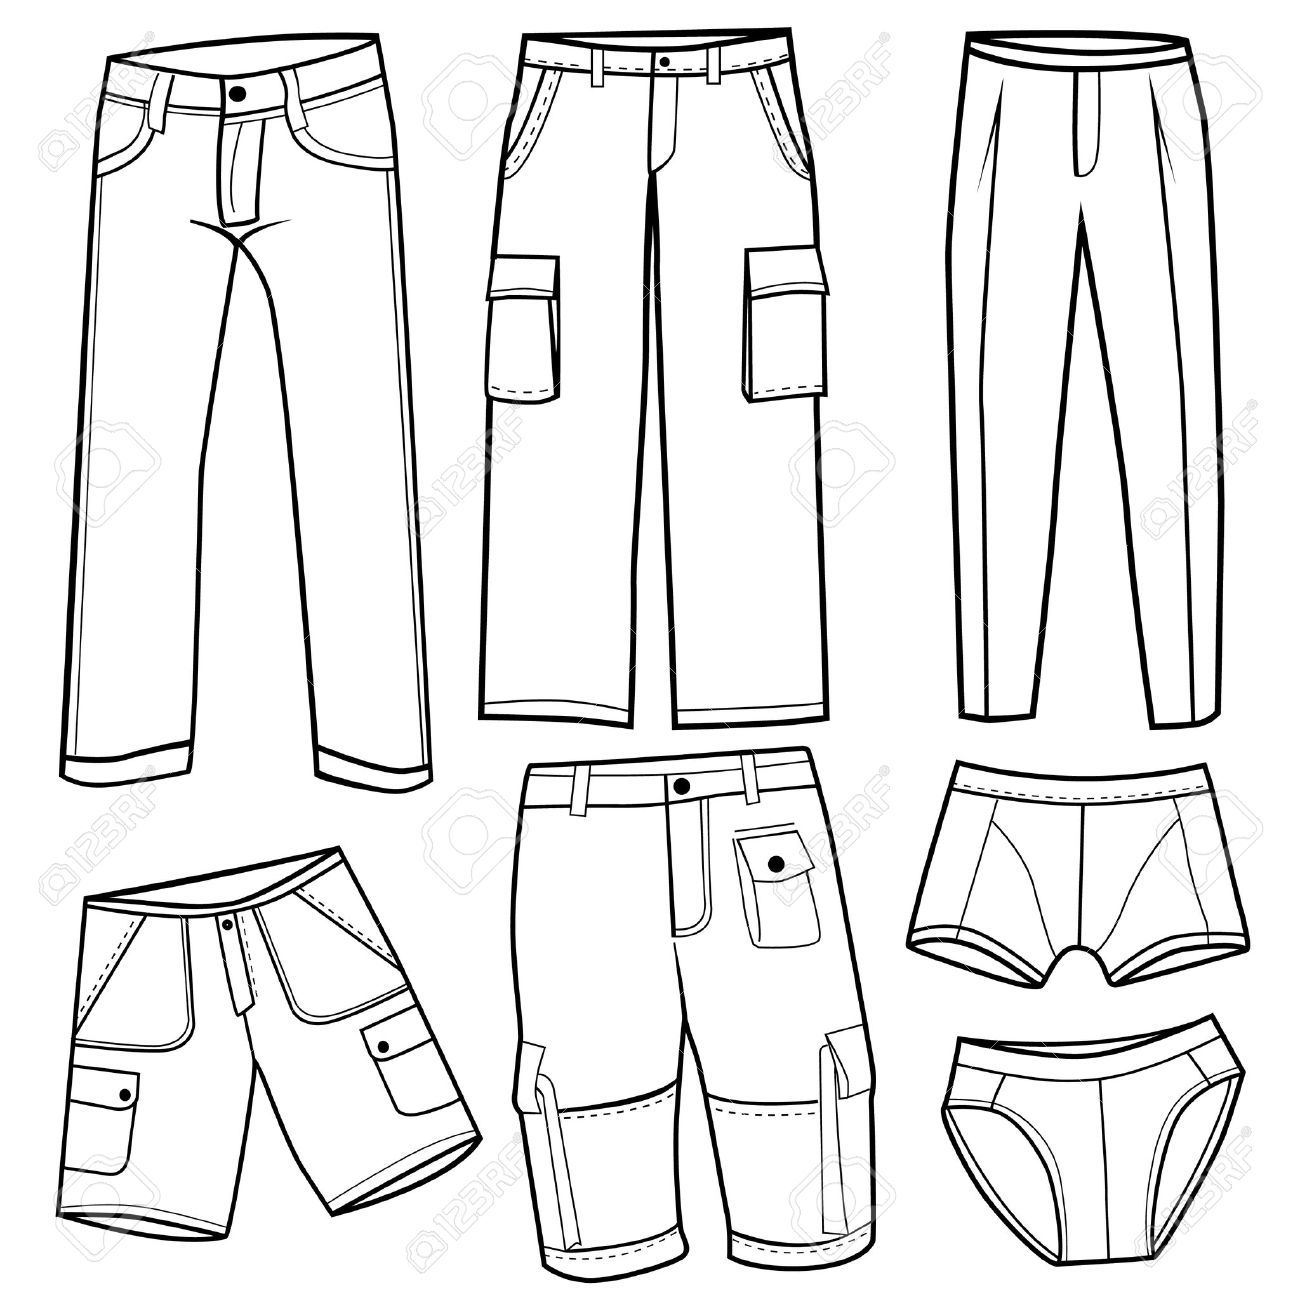 trousers clipart line drawing